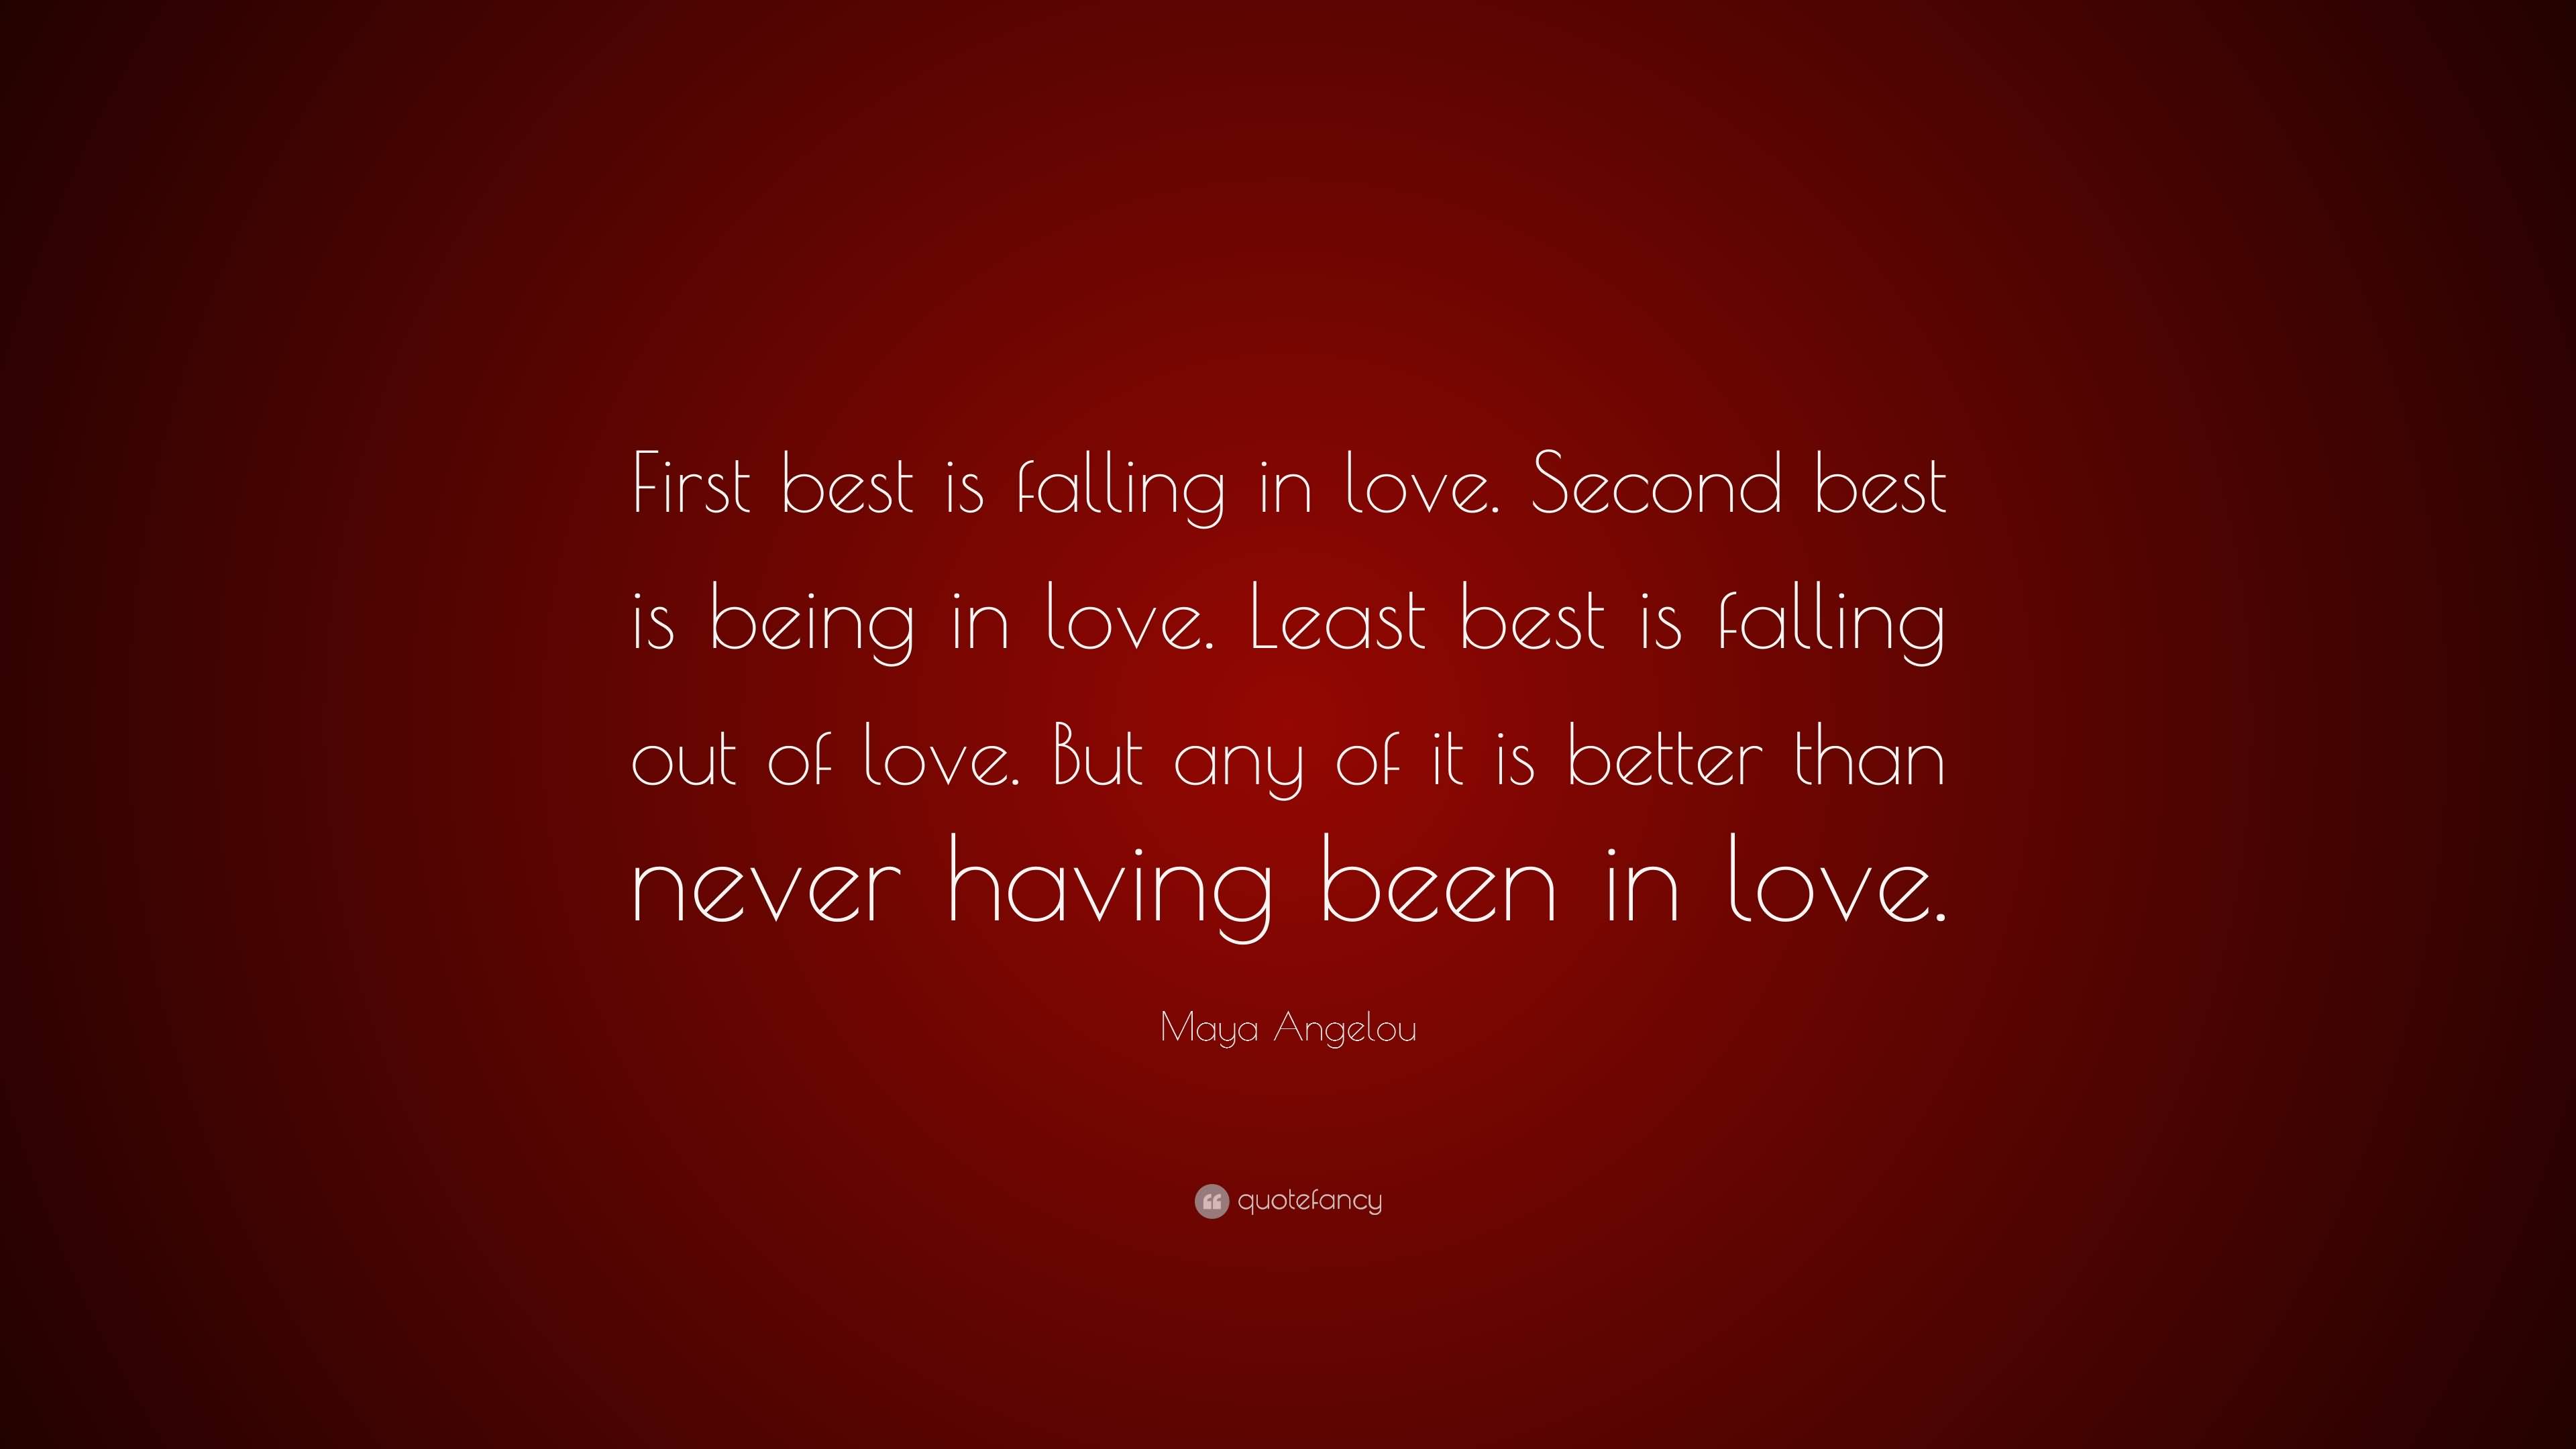 Maya Angelou Quotes About Love 07